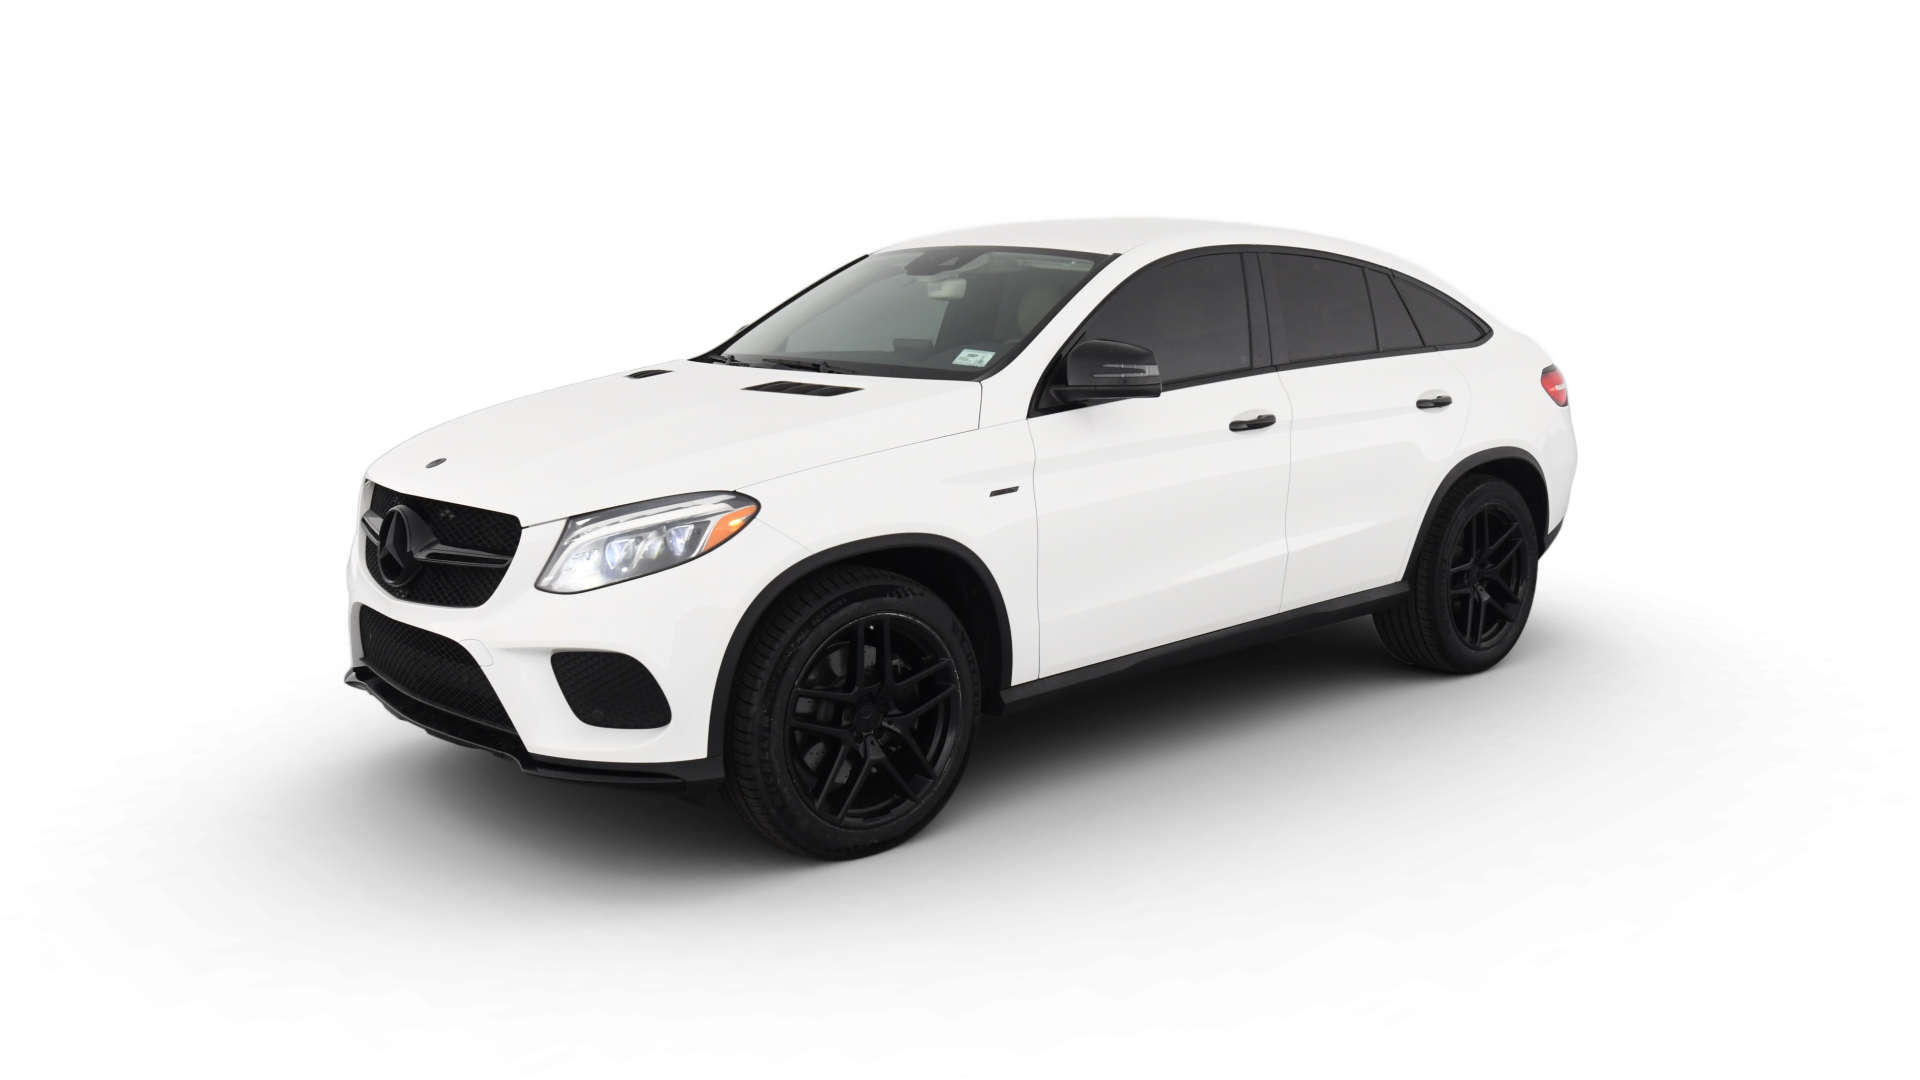 Mercedes-Benz GLE Coupe model image.